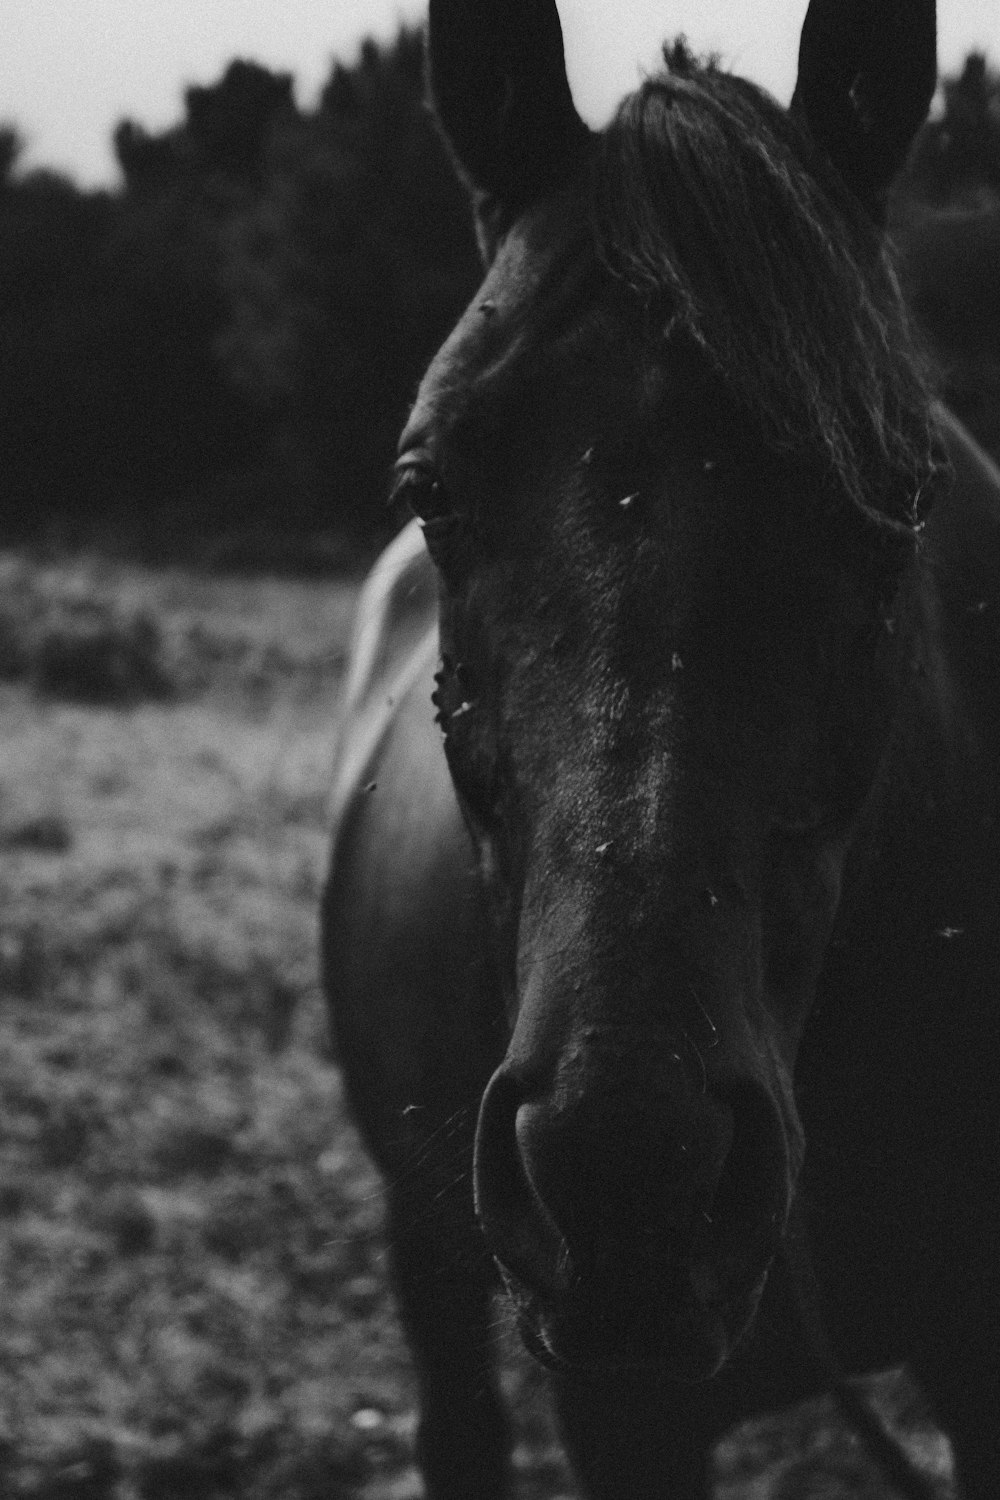 grayscale photography of a horse's face